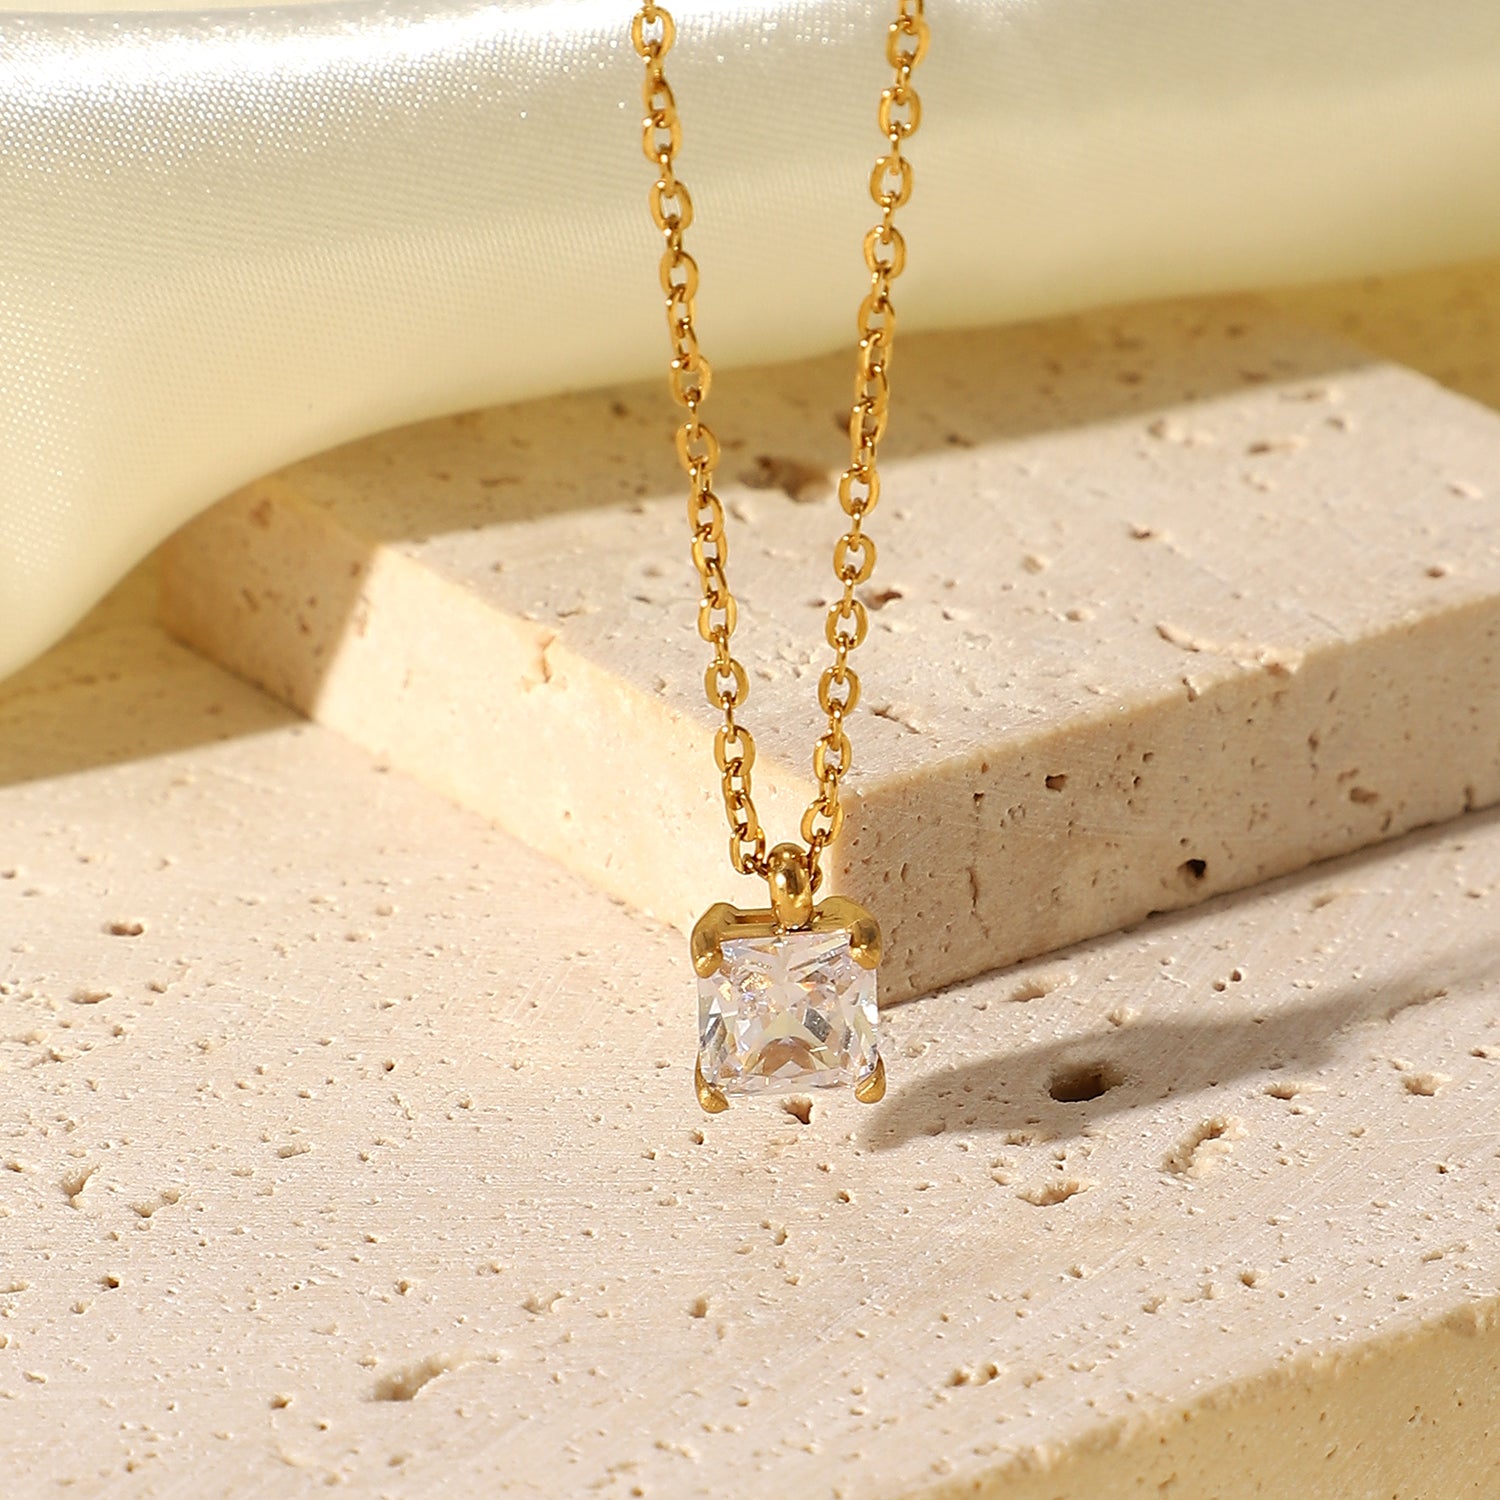 Gold Necklace with a Square white Cubic Zirconia